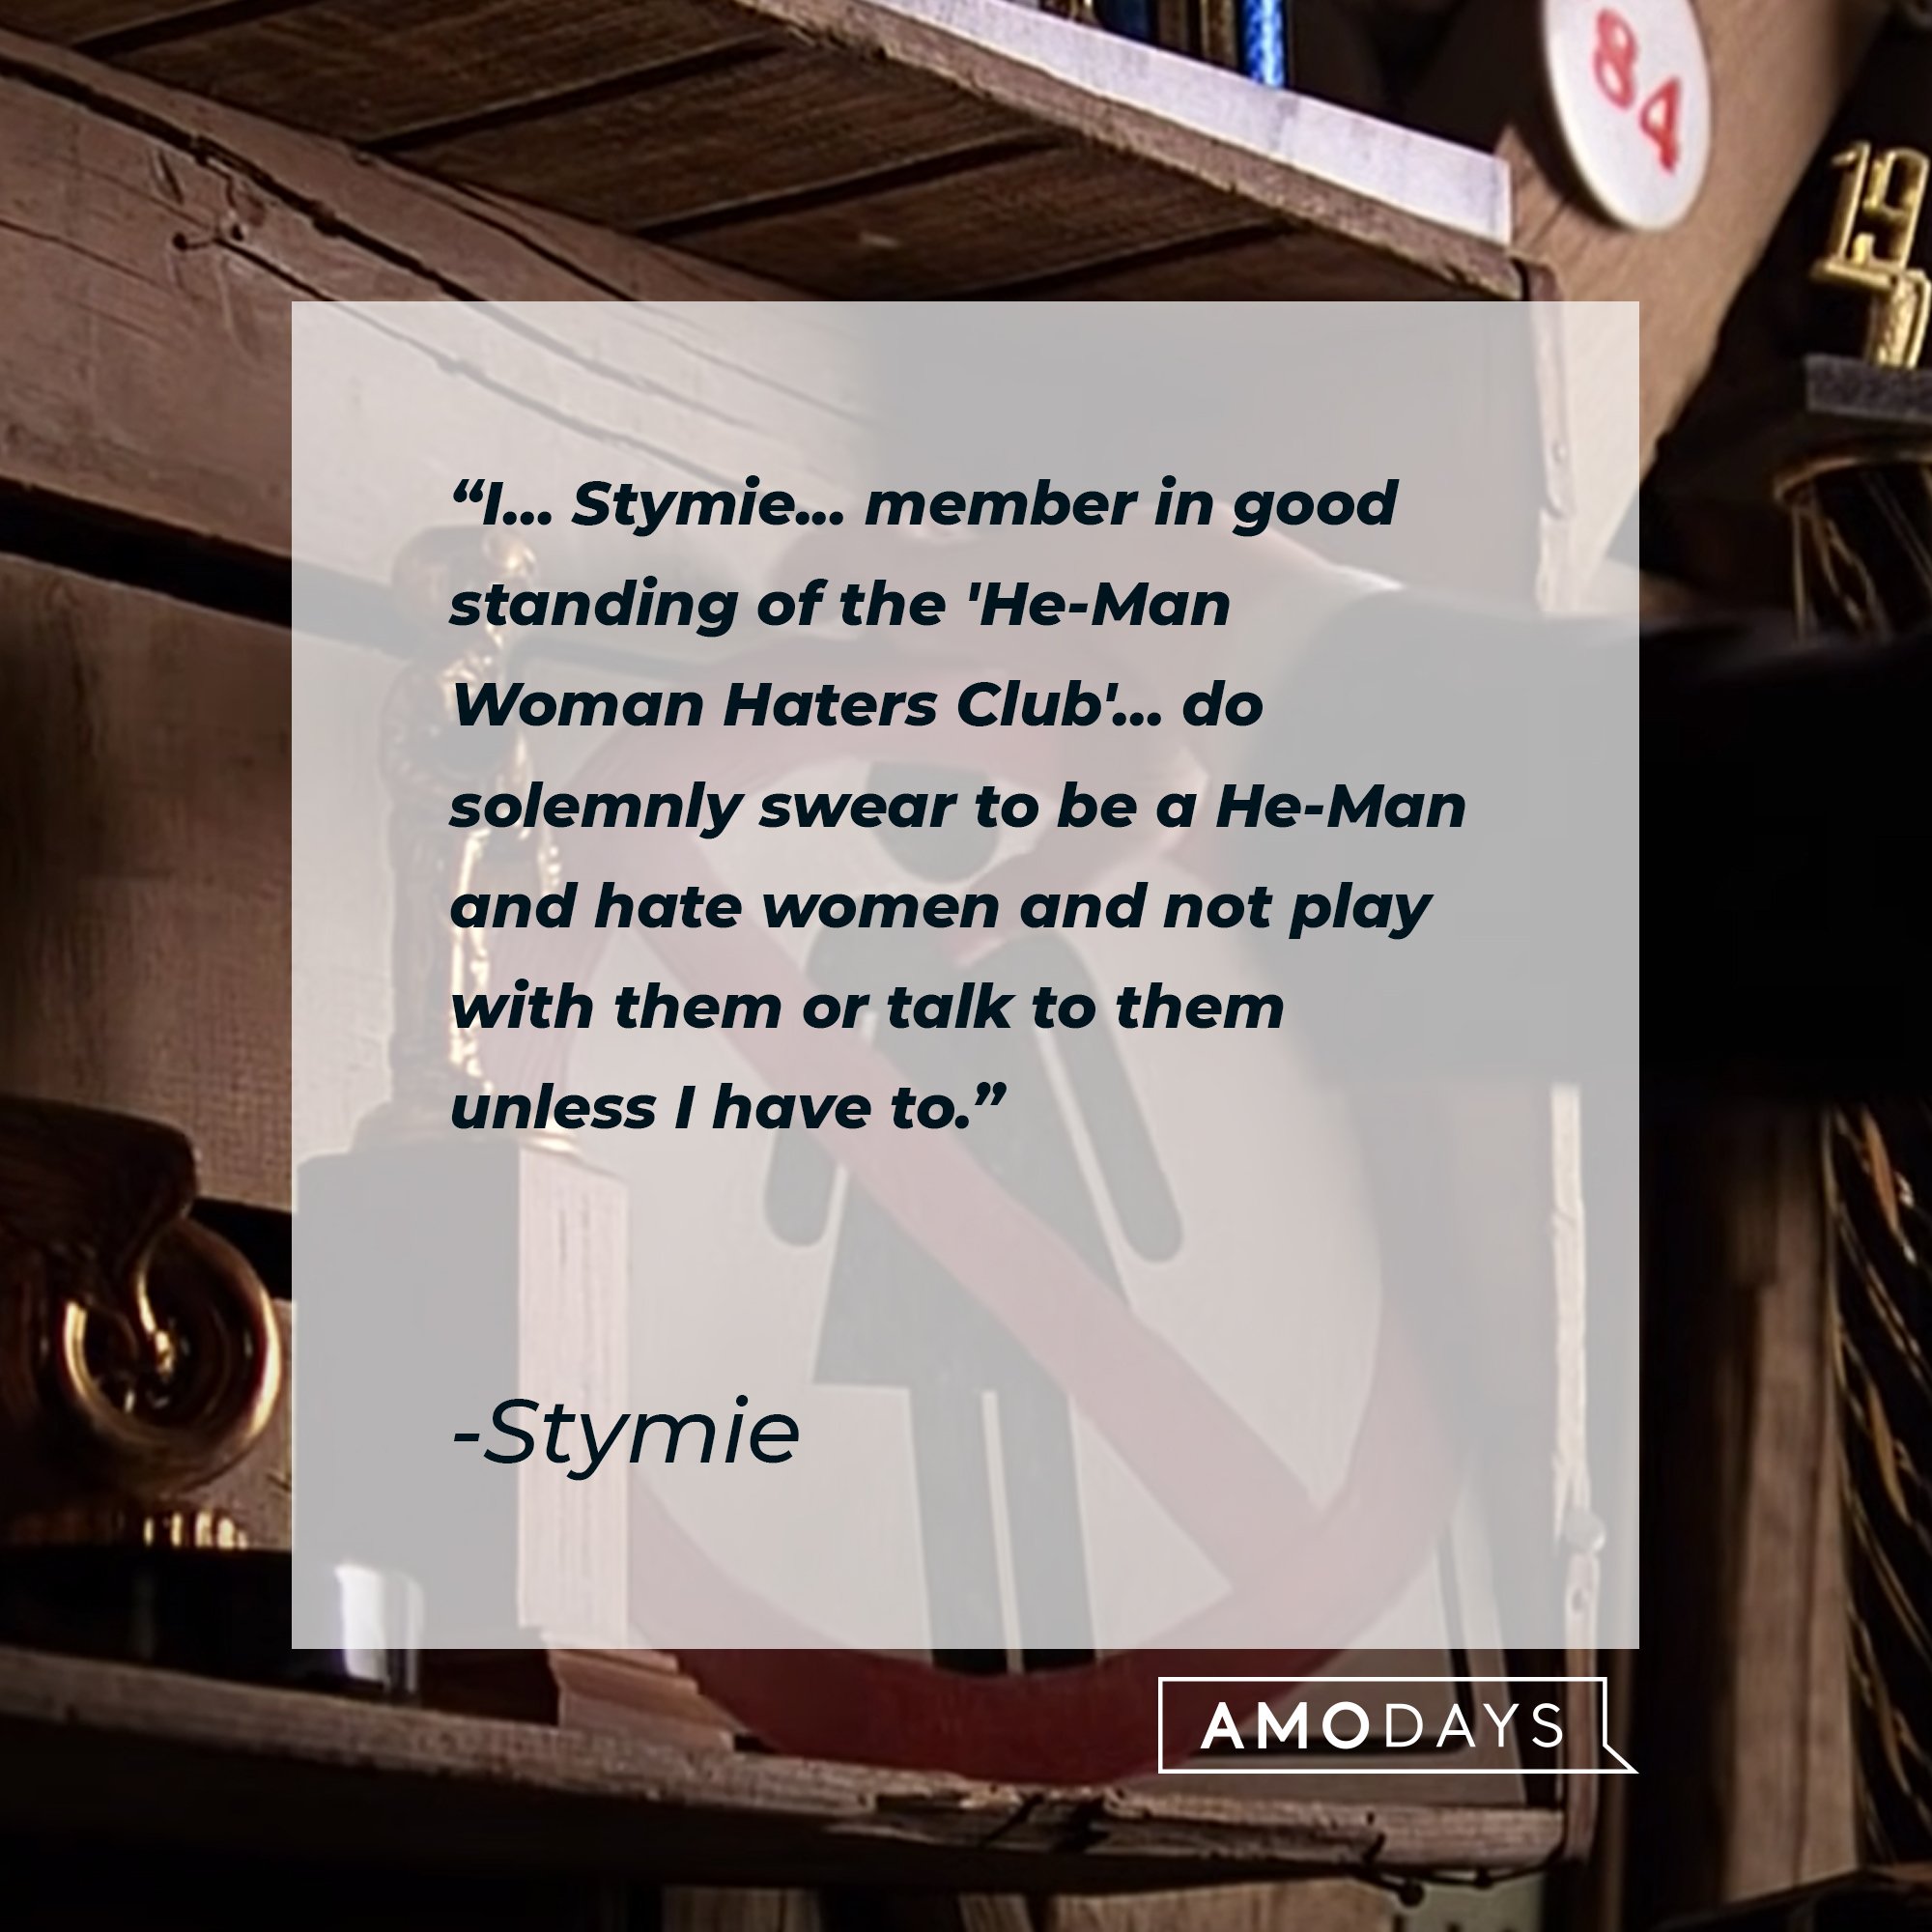 Stymie’s quote: "I… Stymie... member in good standing of the 'He-Man Woman Haters Club'... do solemnly swear to be a He-Man and hate women and not play with them or talk to them unless I have to." | Image: AmoDays